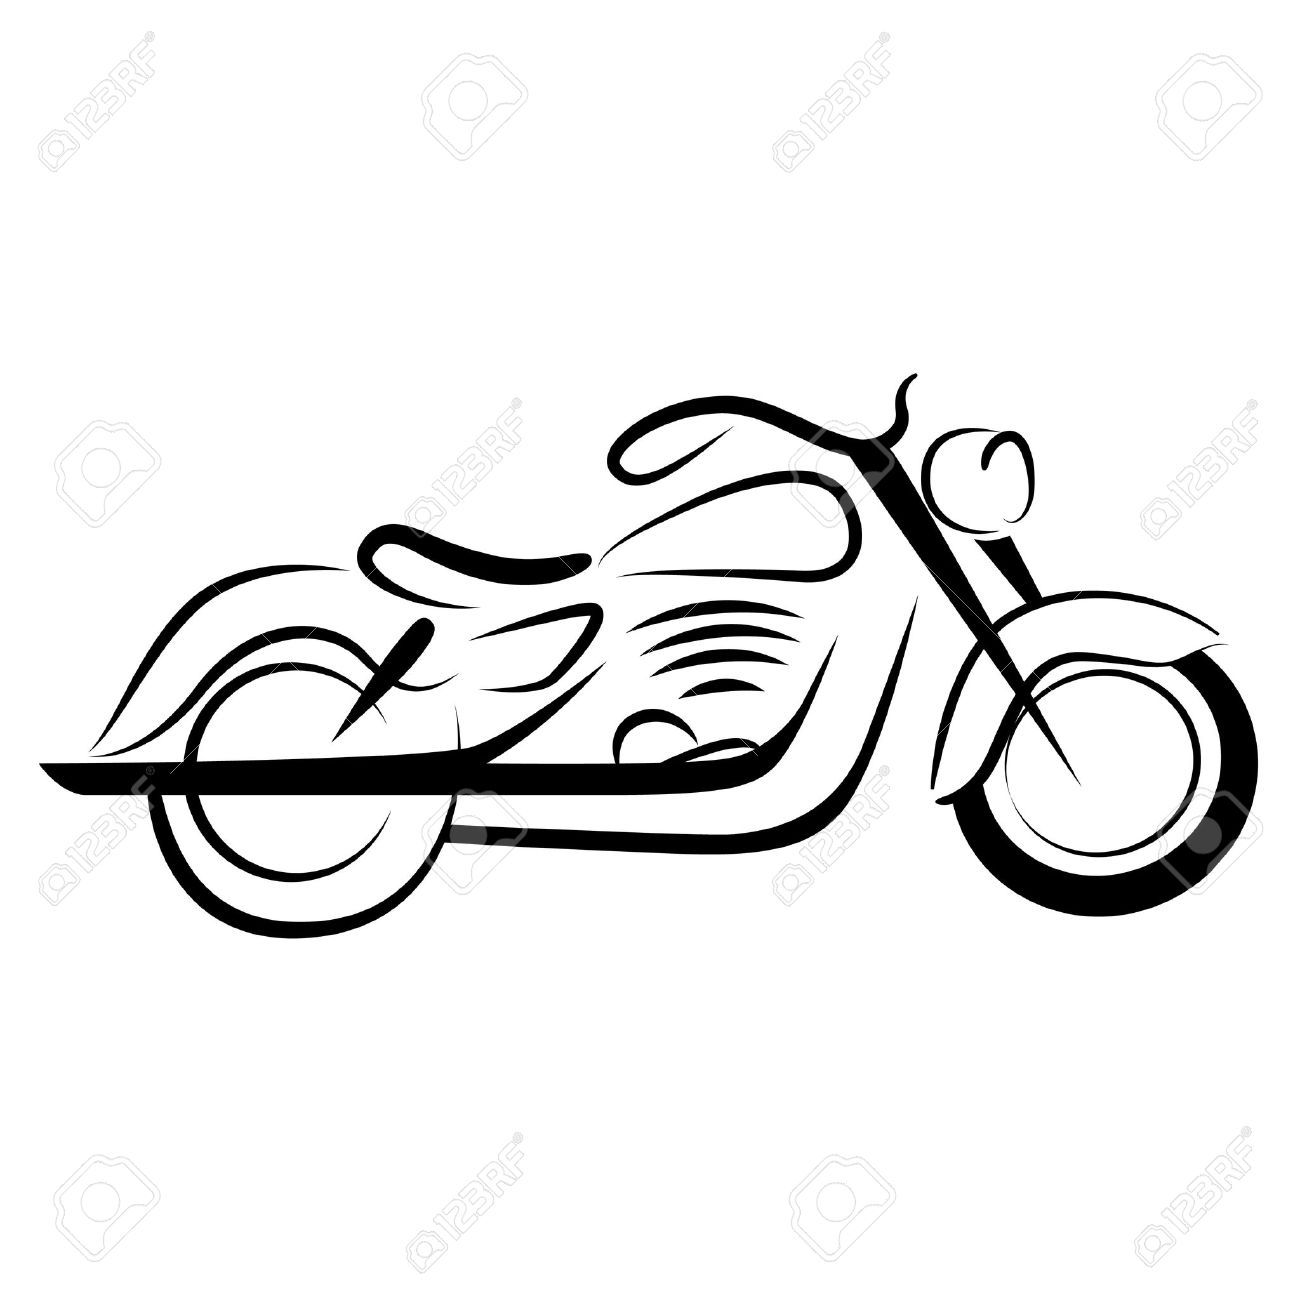 motorcycle clipart royalty free